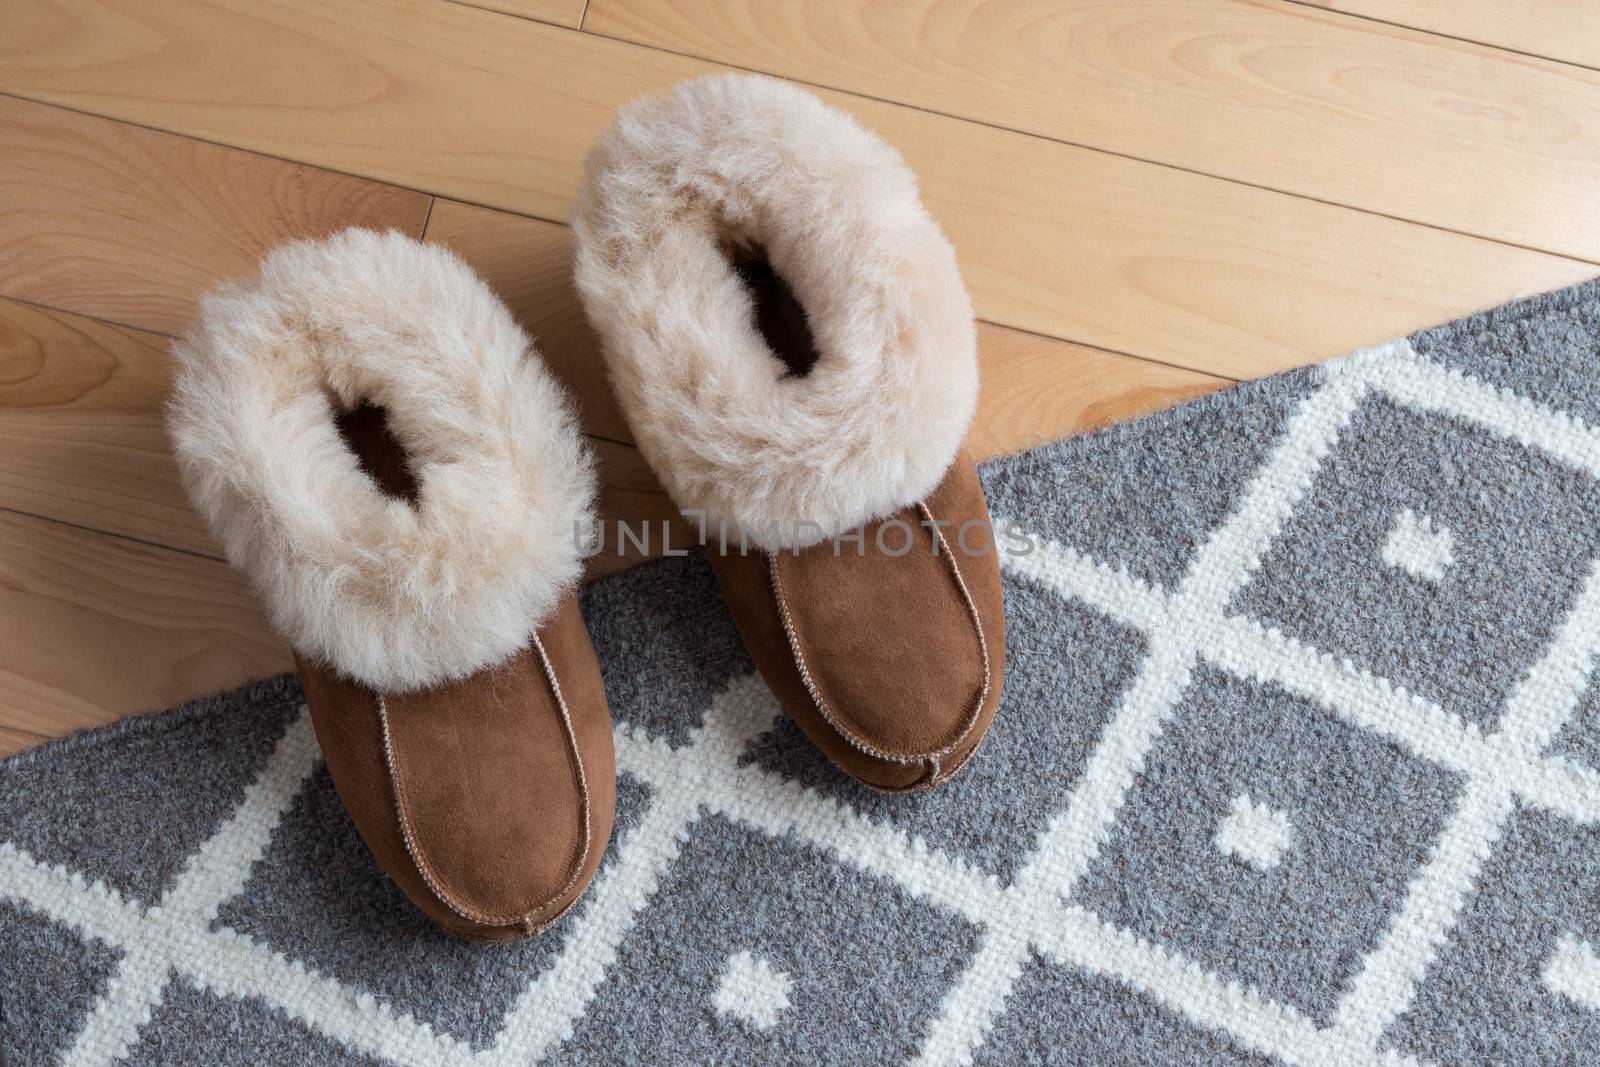 Warm comfortable slippers on a gray rug.